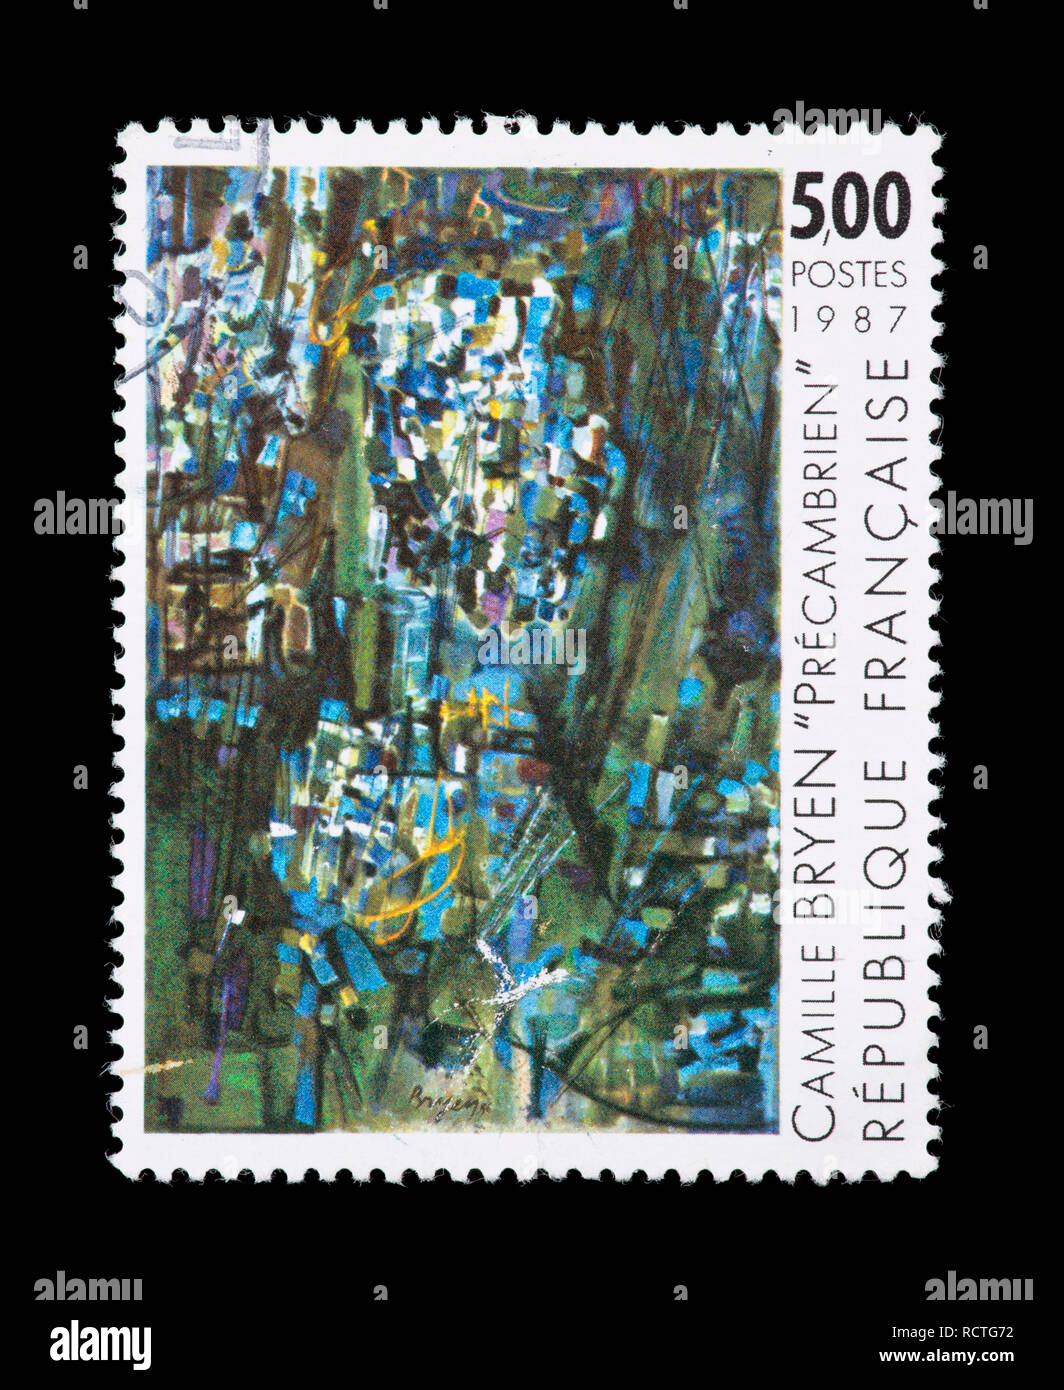 Postage stamp from France depicting the Camille Bryen painting Precambrien. Stock Photo